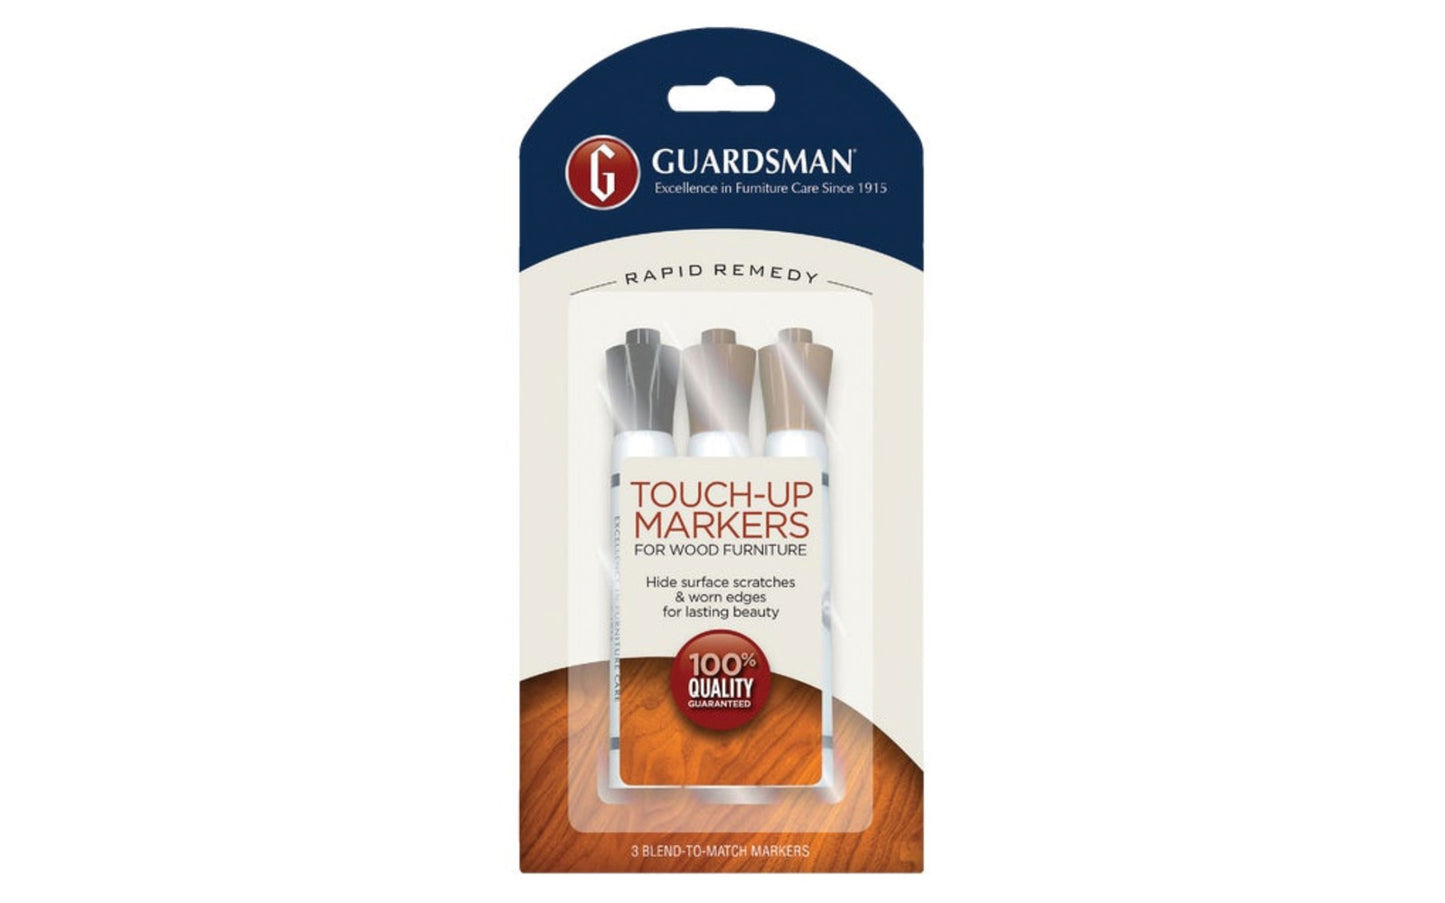 Guardsman Touch-Up Markers